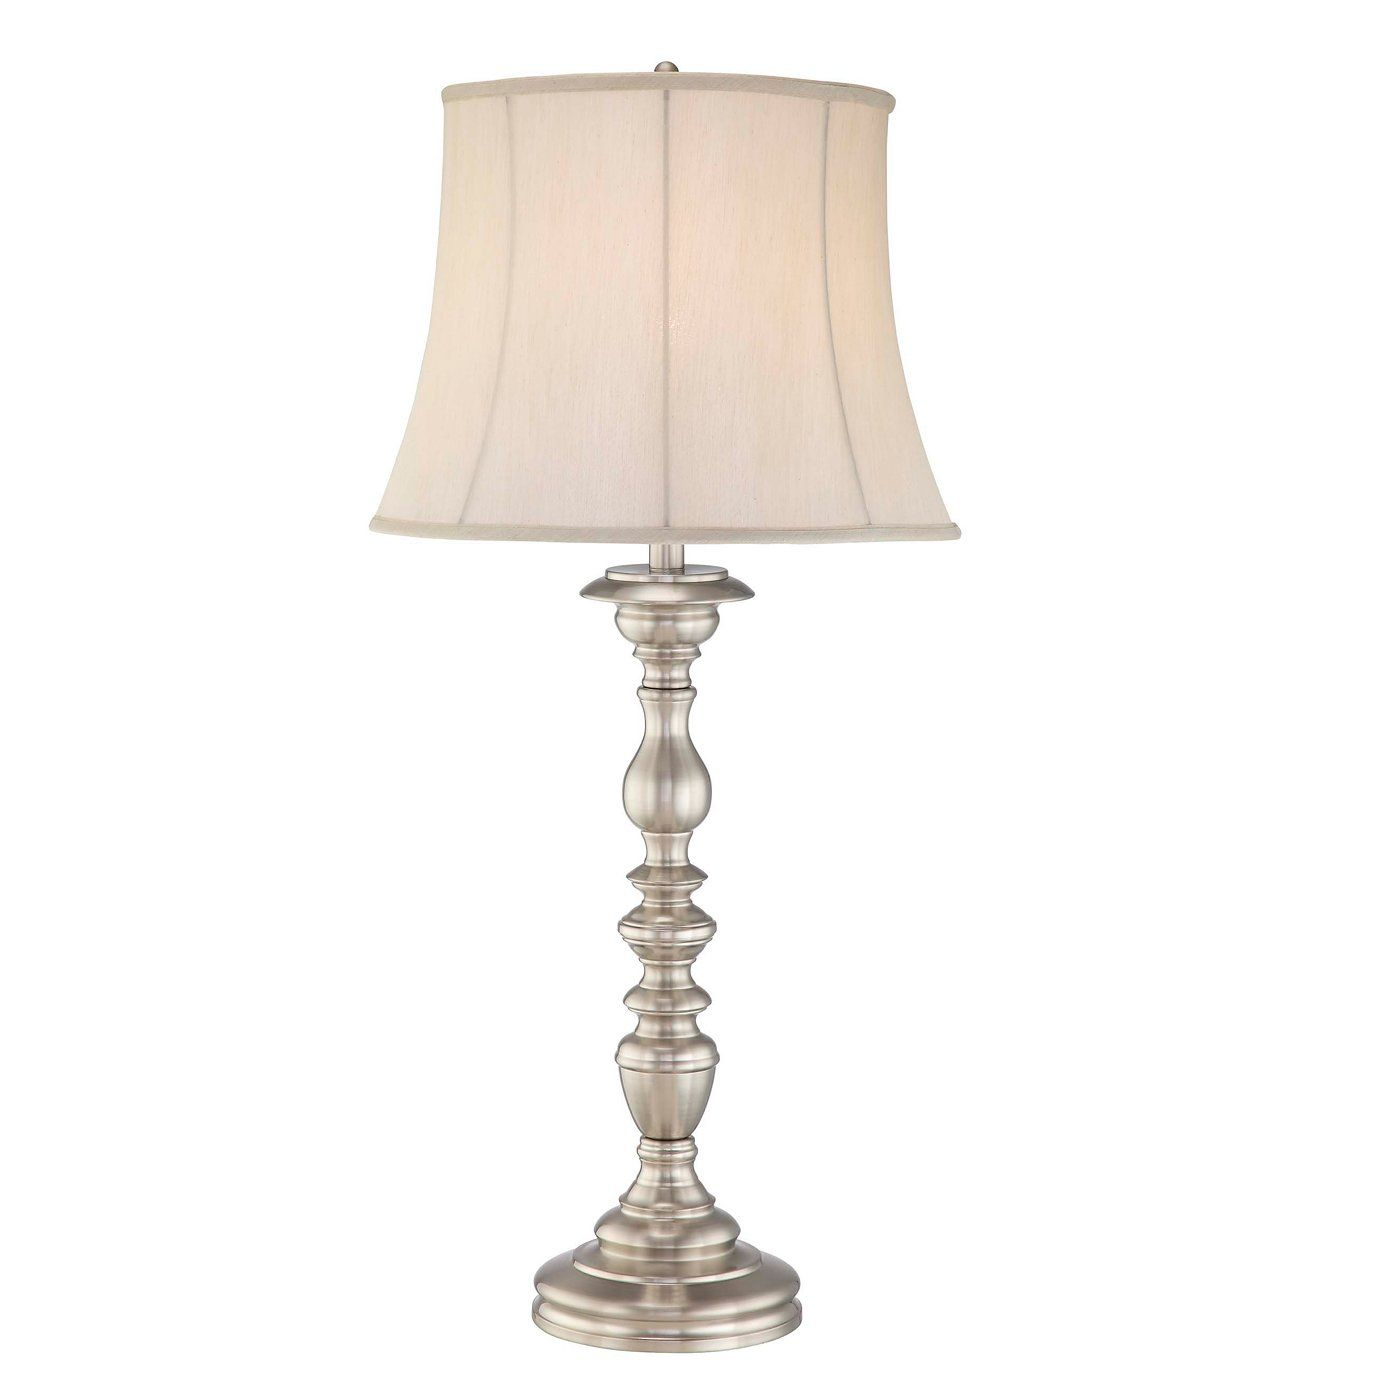 Quoizel Q904t Marin Quoizel Table Lamp 98 At Lighting intended for proportions 1400 X 1400